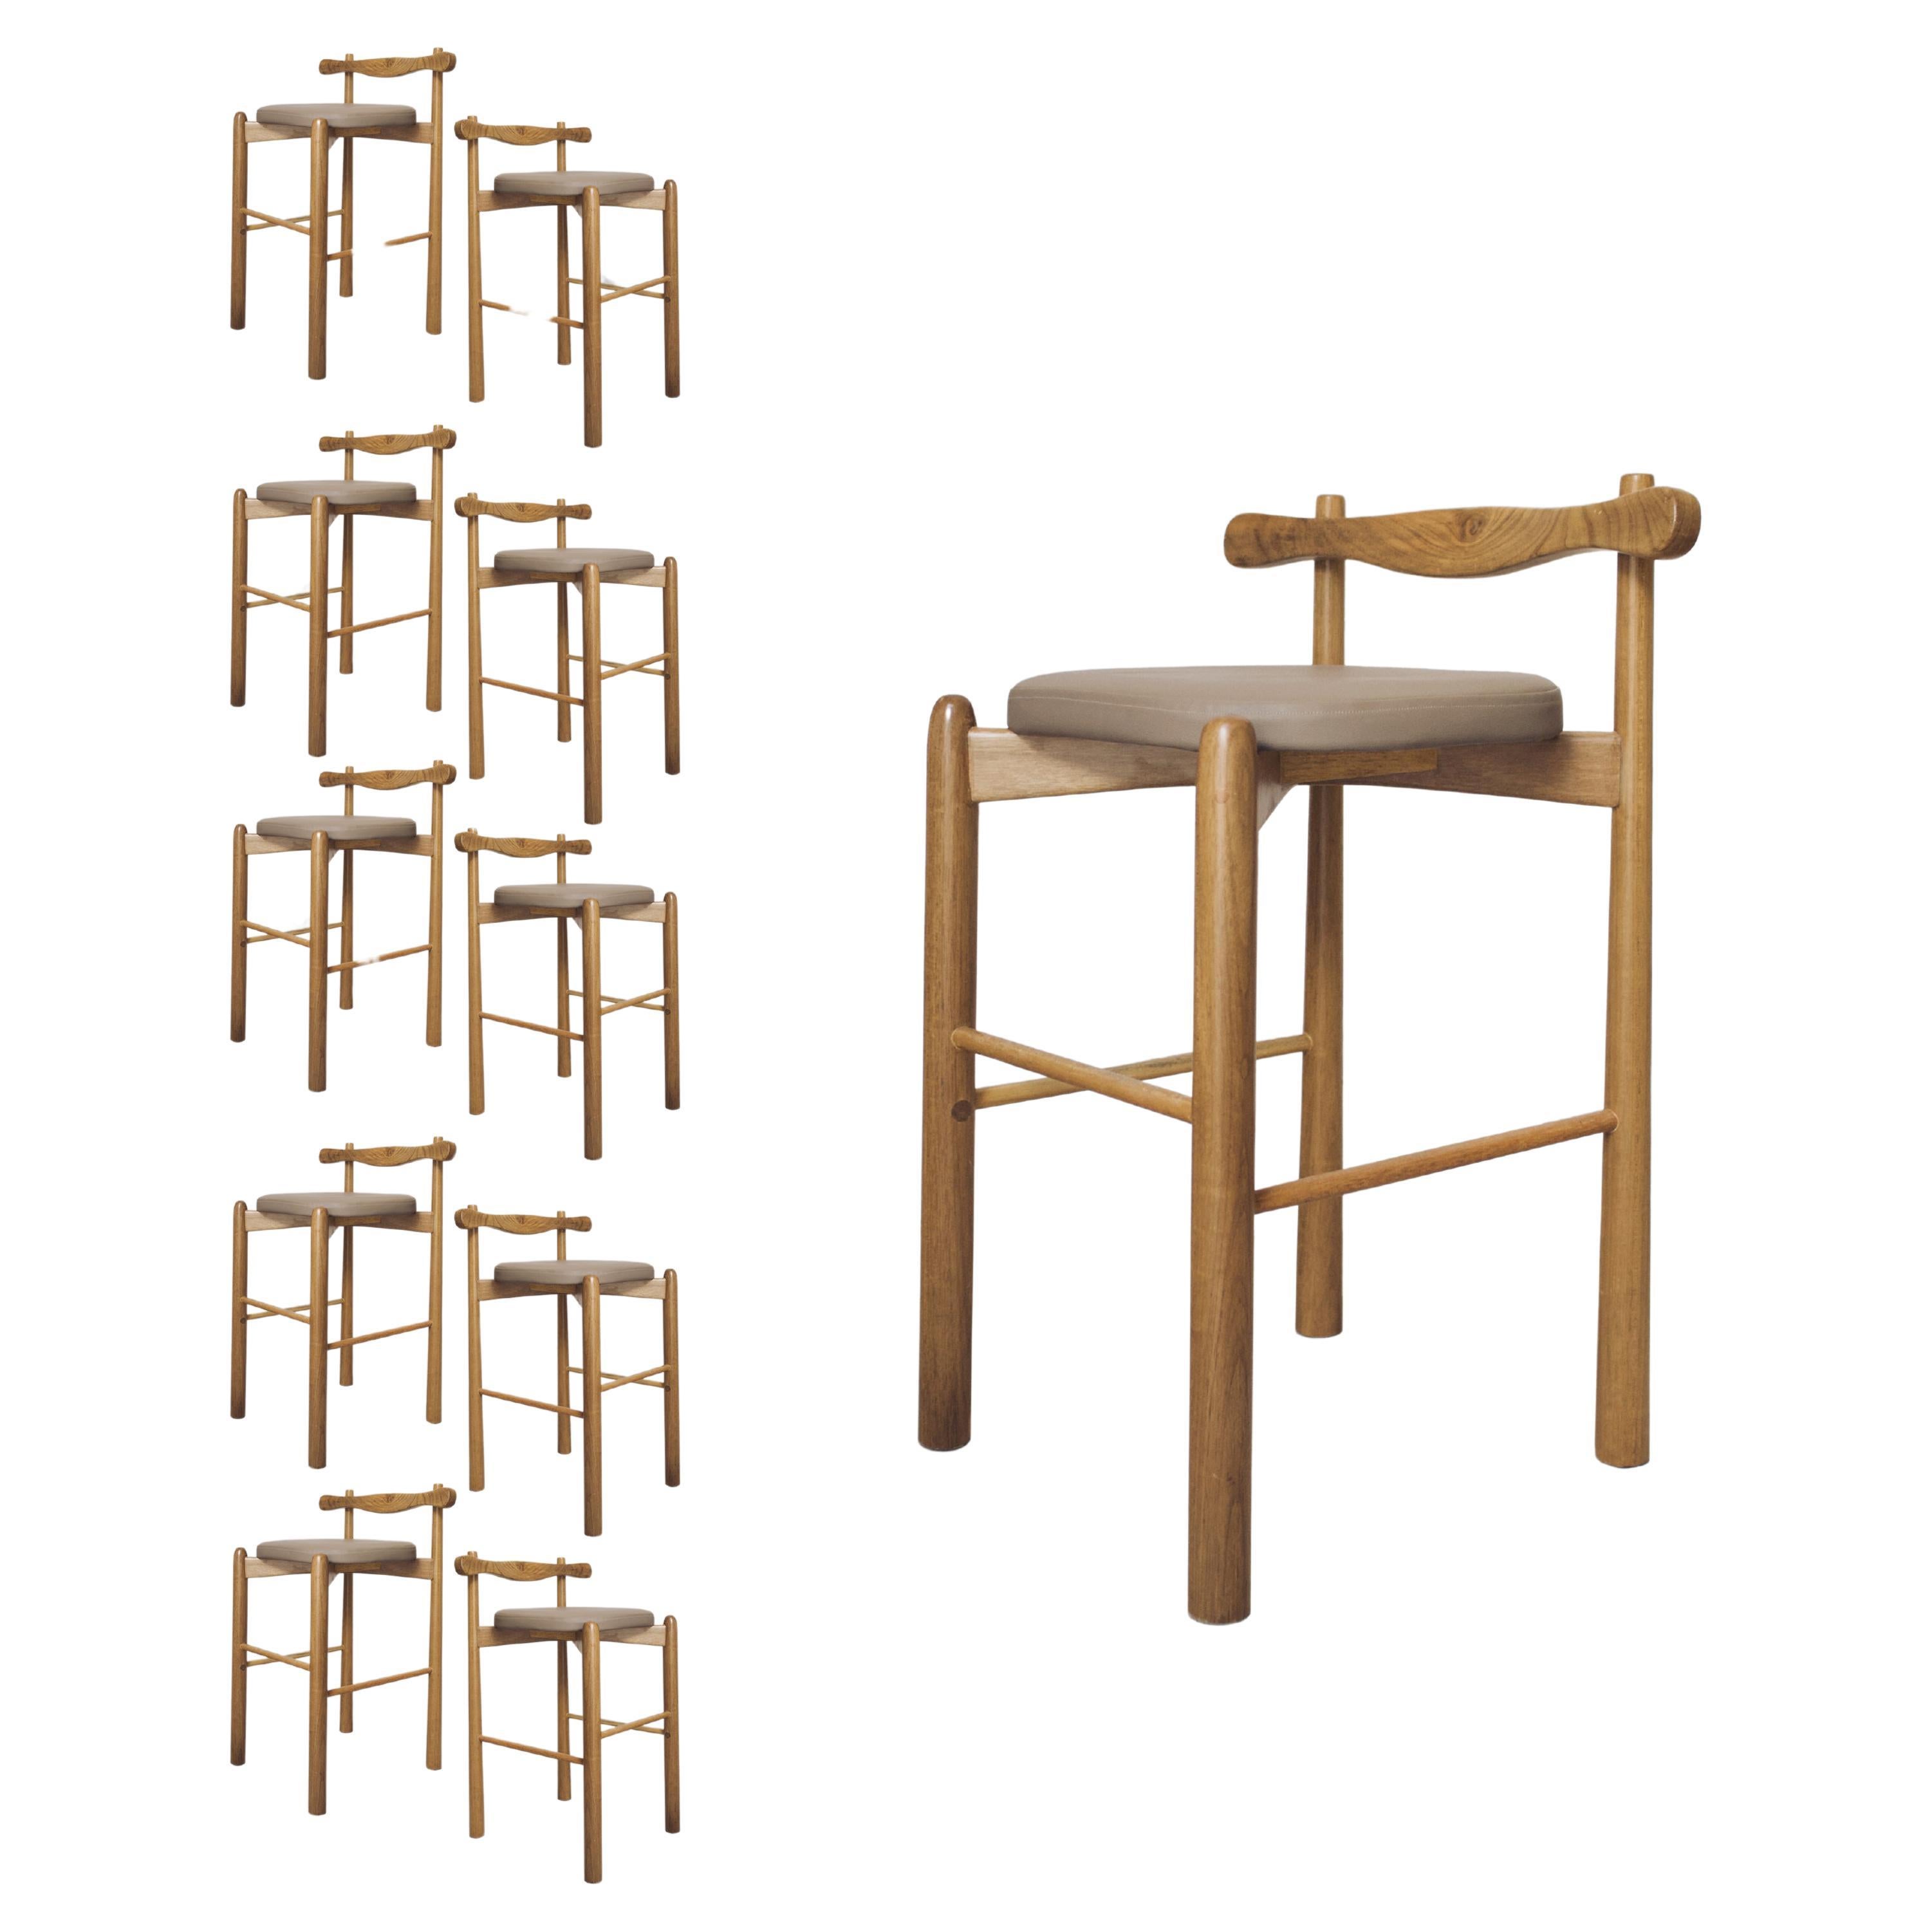 Set of 10 Counter Stools Uçá - Brown Light Brown Finish Wood (fabric ref : F04)